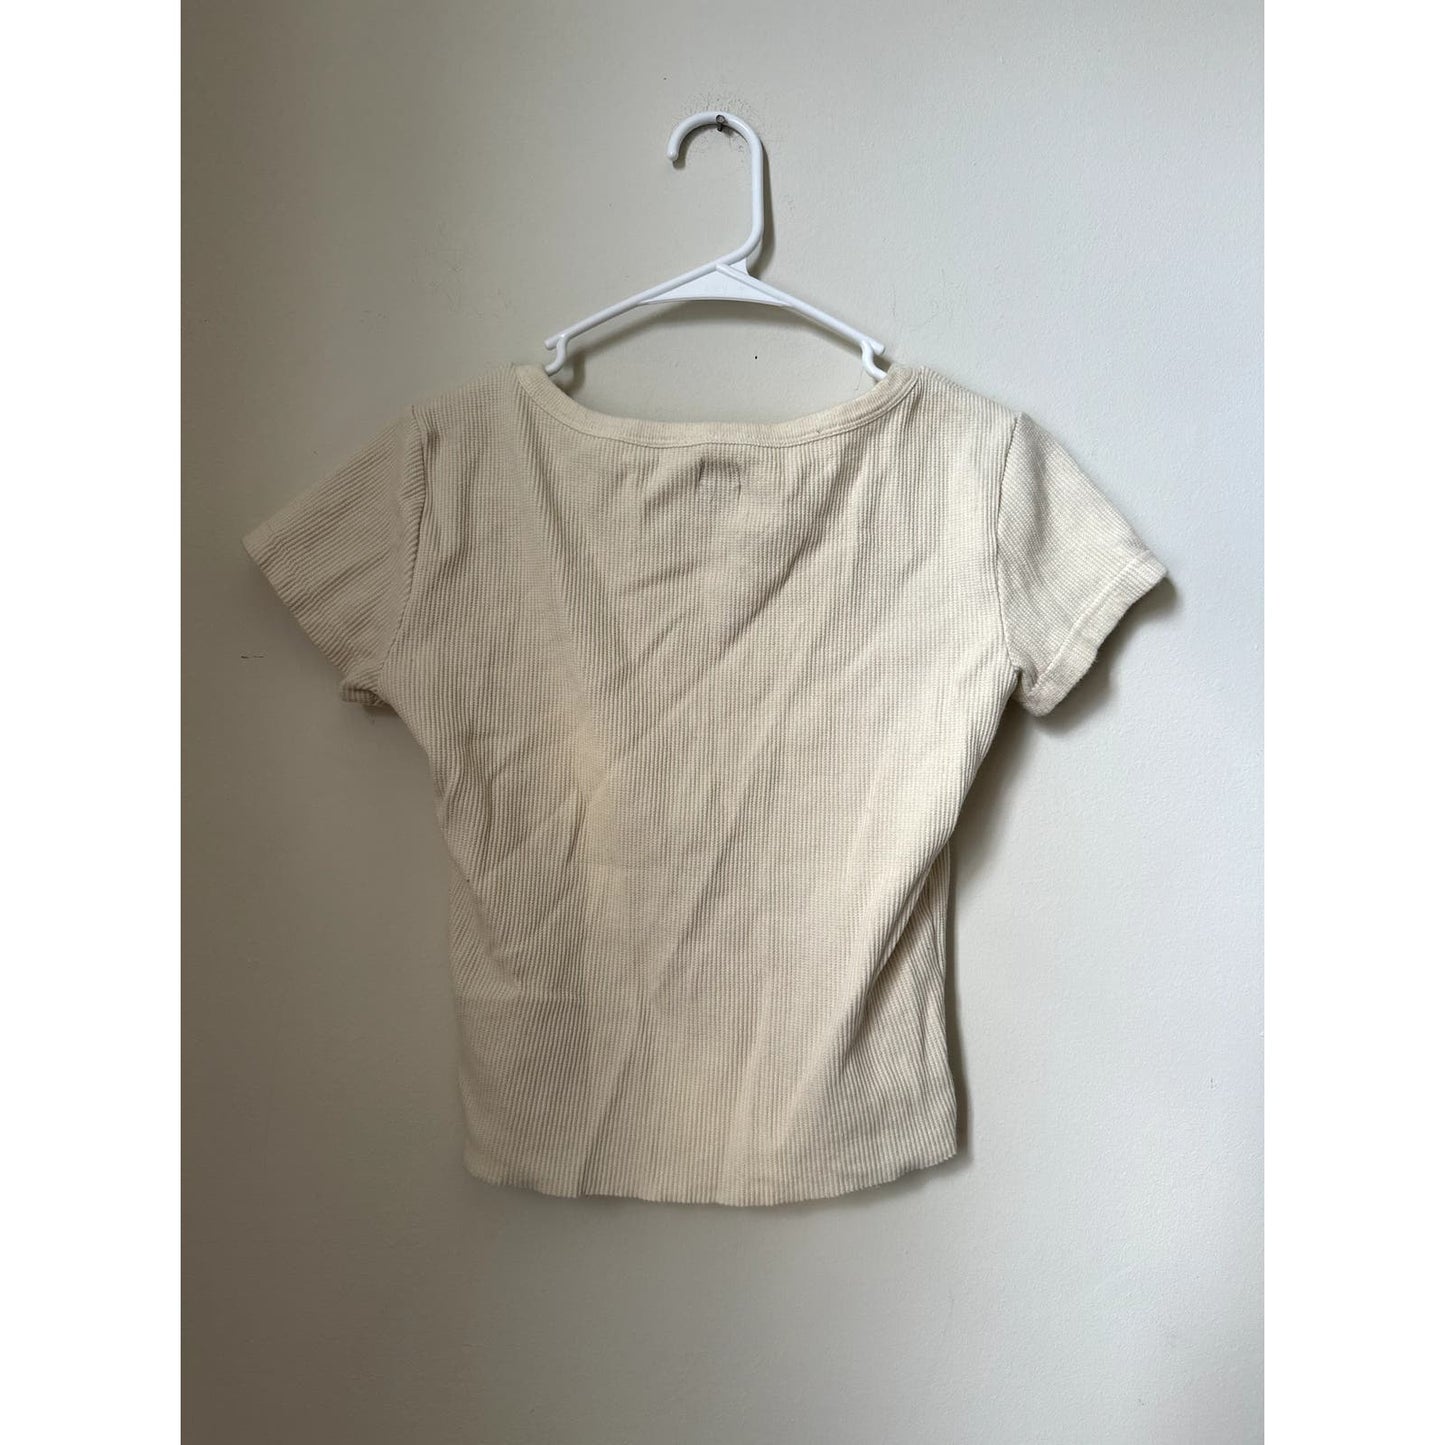 Urban Outfitters BDG Waffle Texture Short Sleeve Top, Size Small